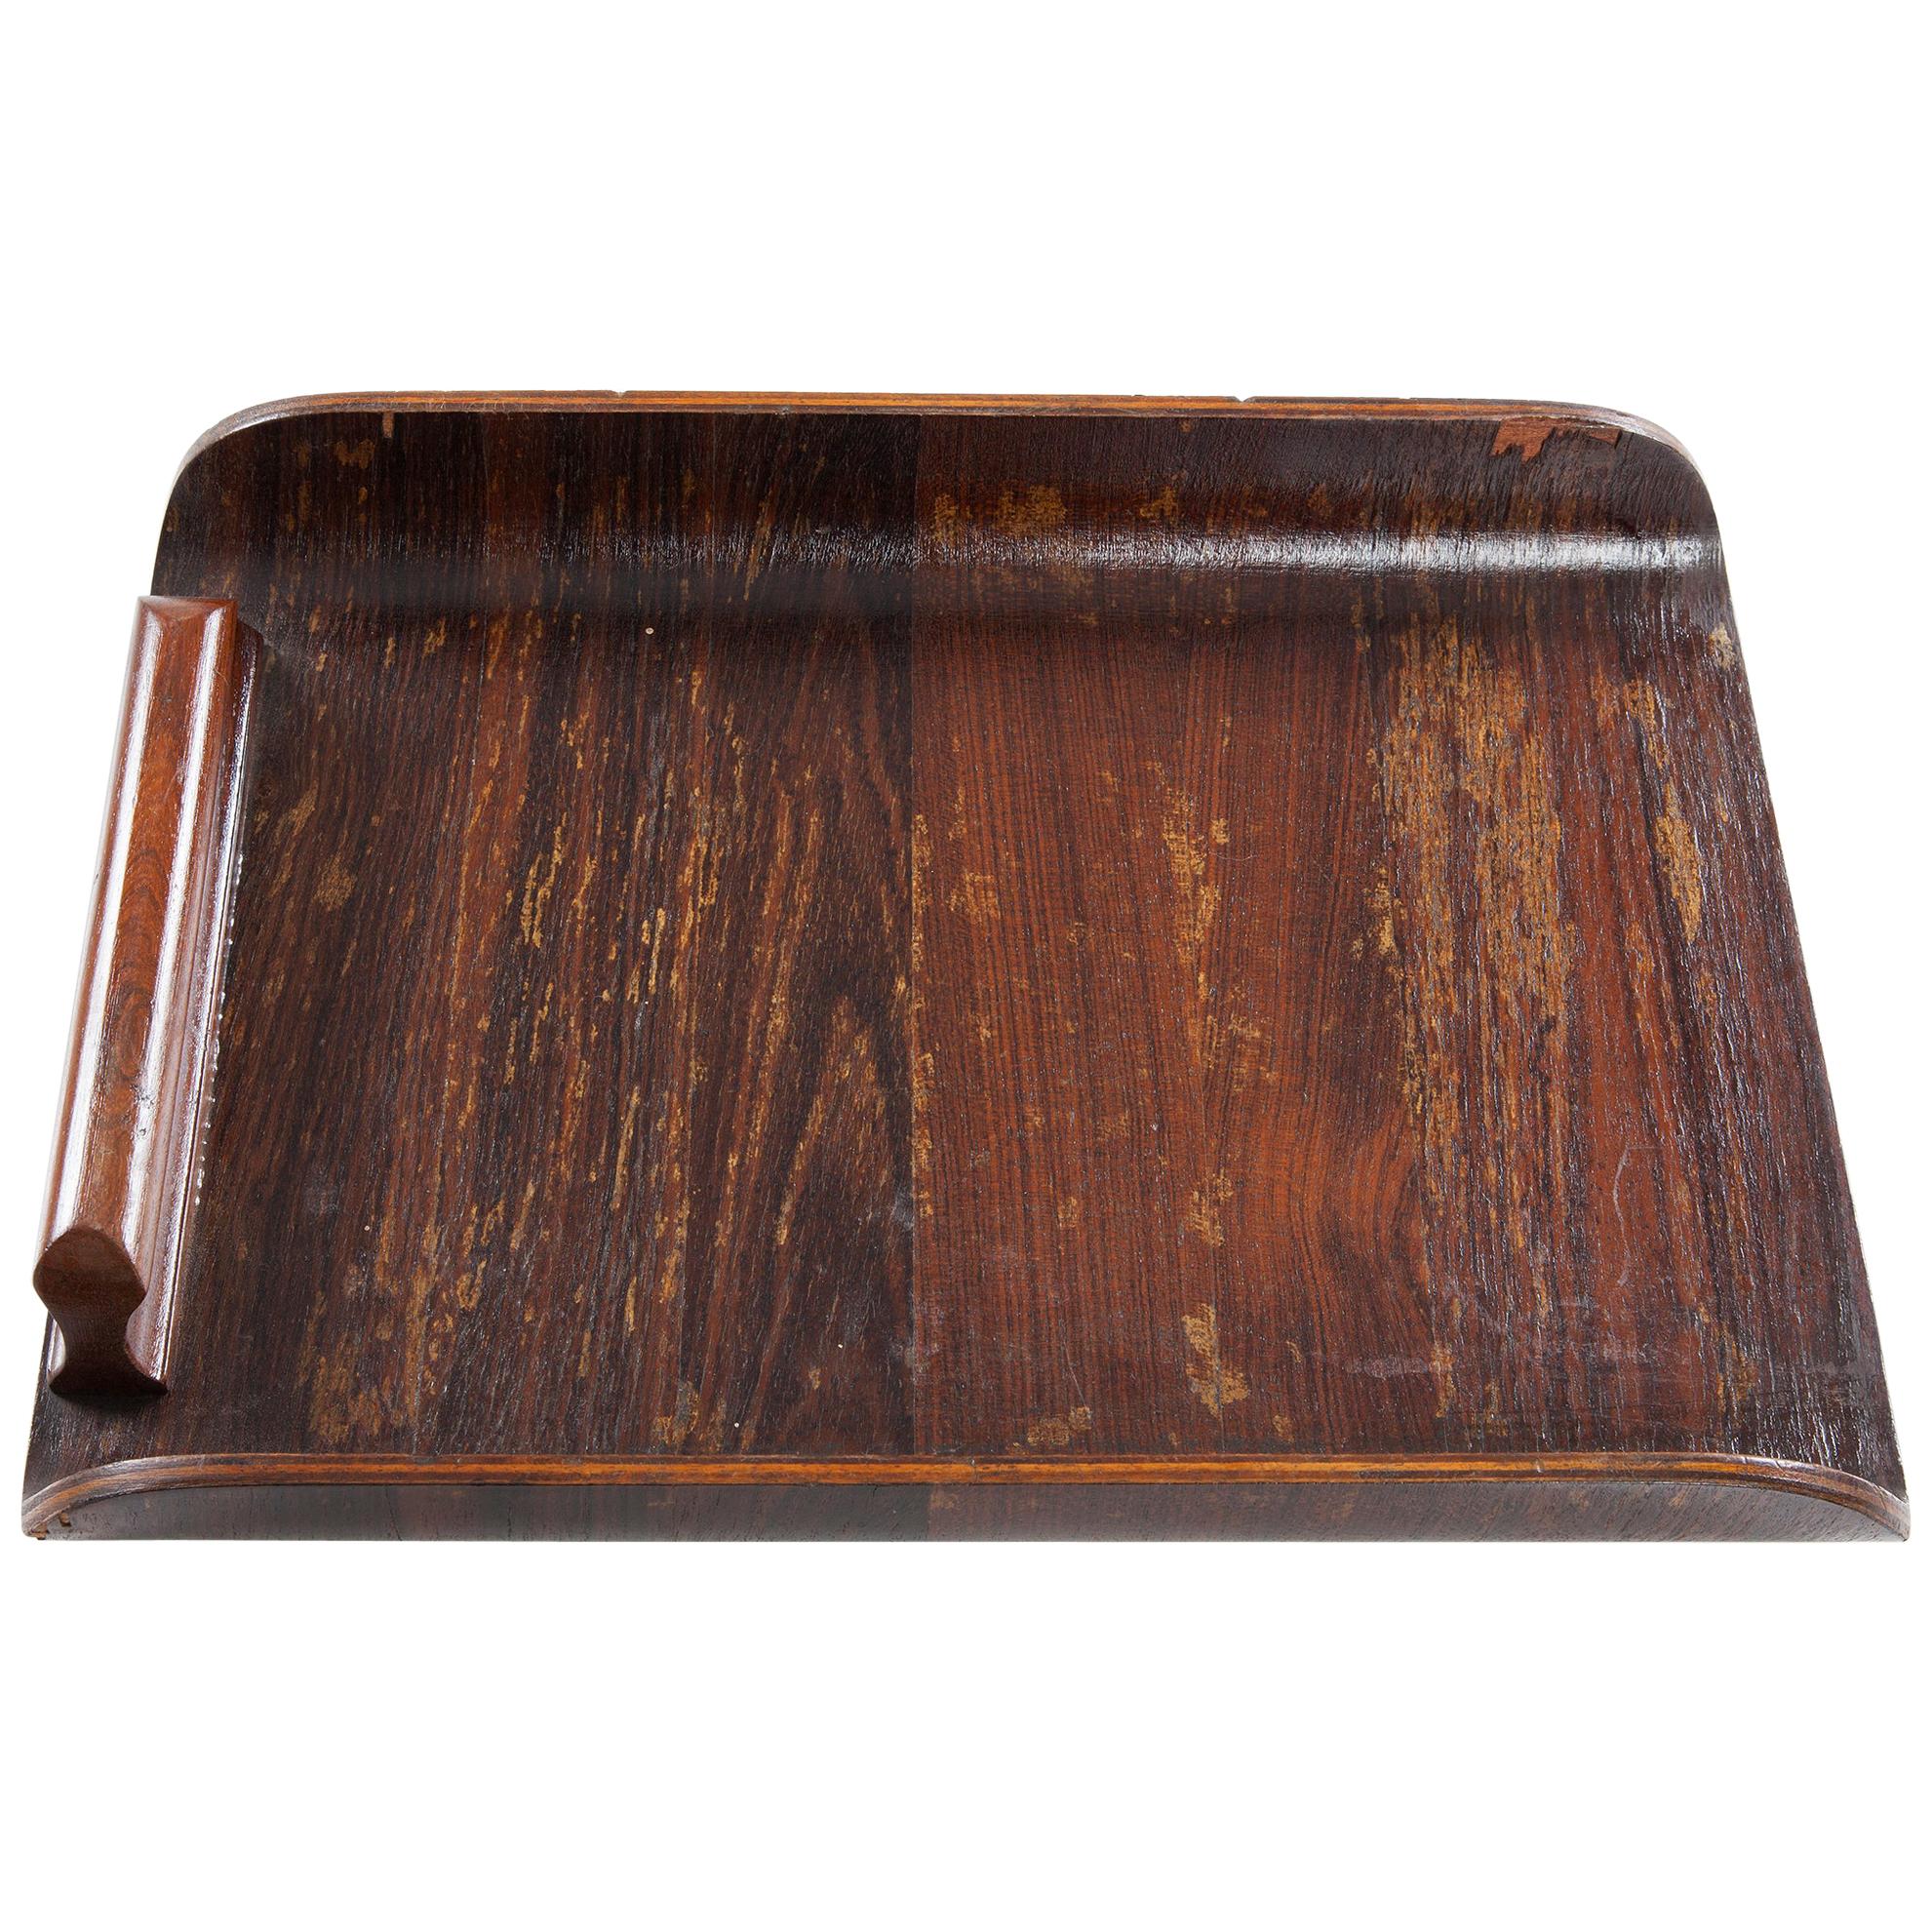 Small Tray in Rosewood, Brazil, 1960s.